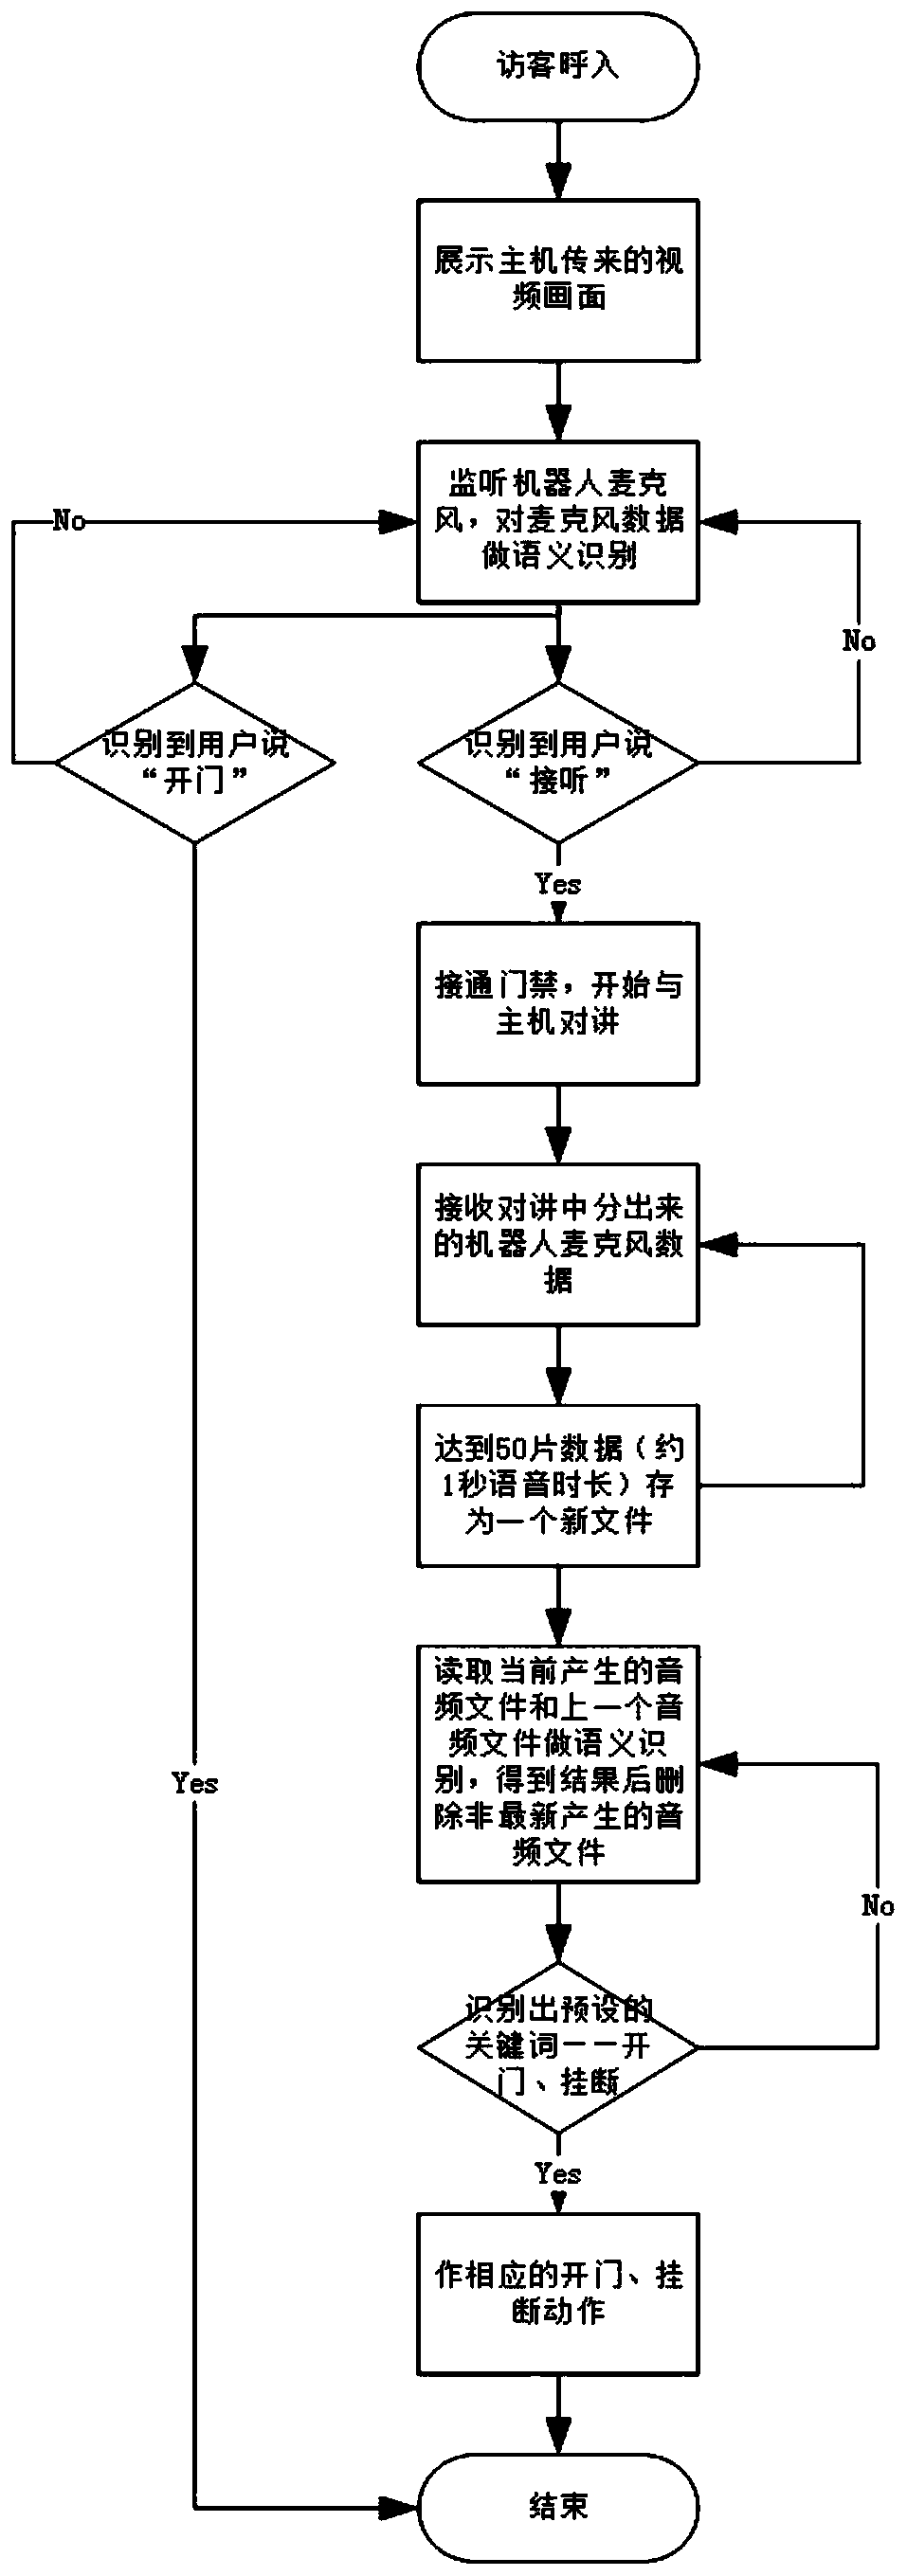 Method, device and system for realizing access control visual intercom service, and intelligent robot